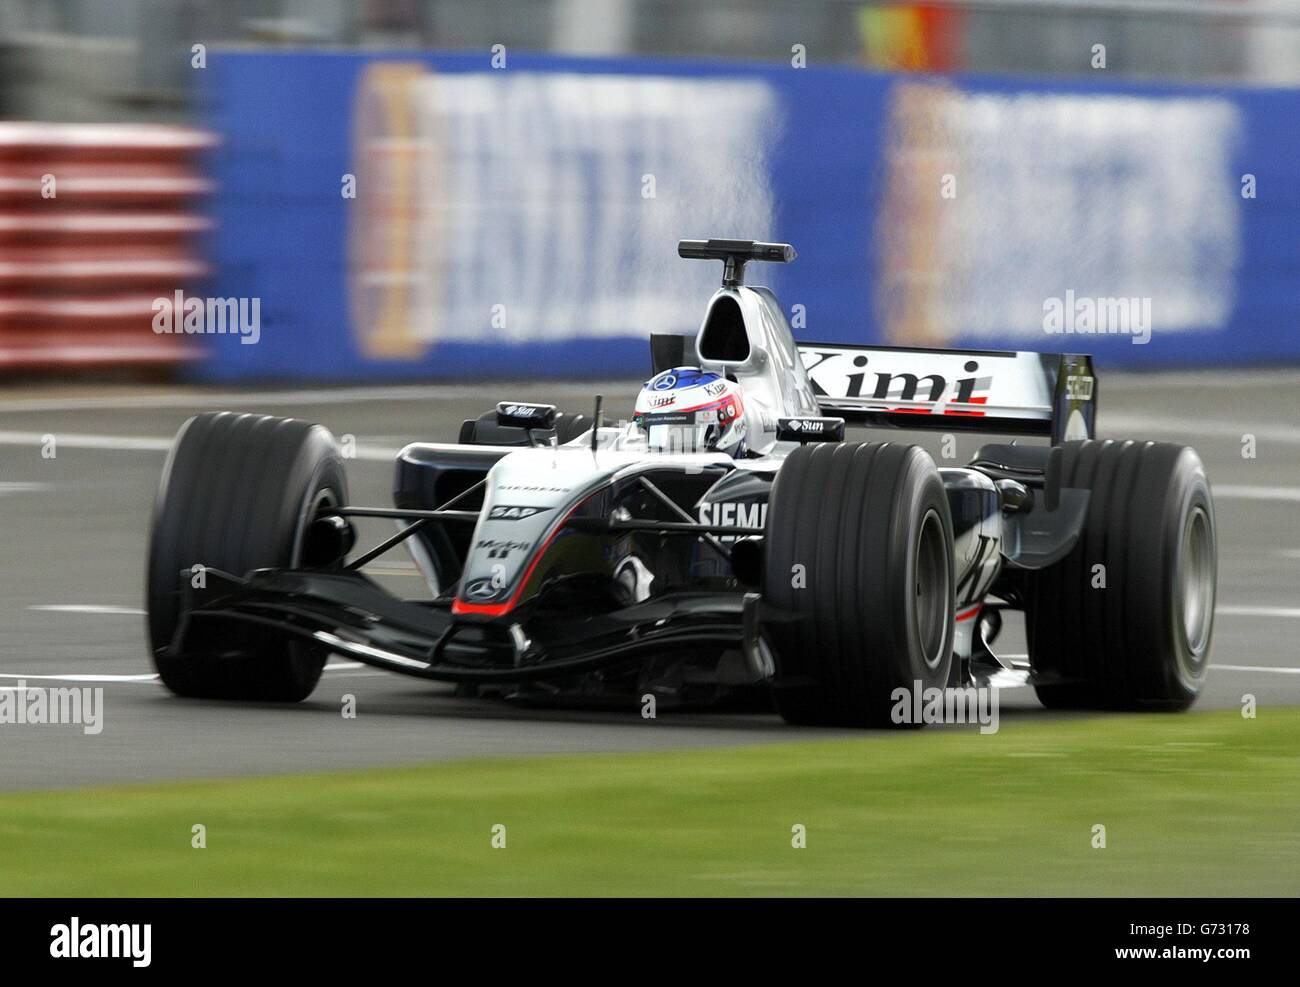 Finland's driver Kimi Raikkonen goes past the finishing line during qualifying at Silverstone, Northamptonshire, ahead of tomorrow's British Grand Prix. Stock Photo